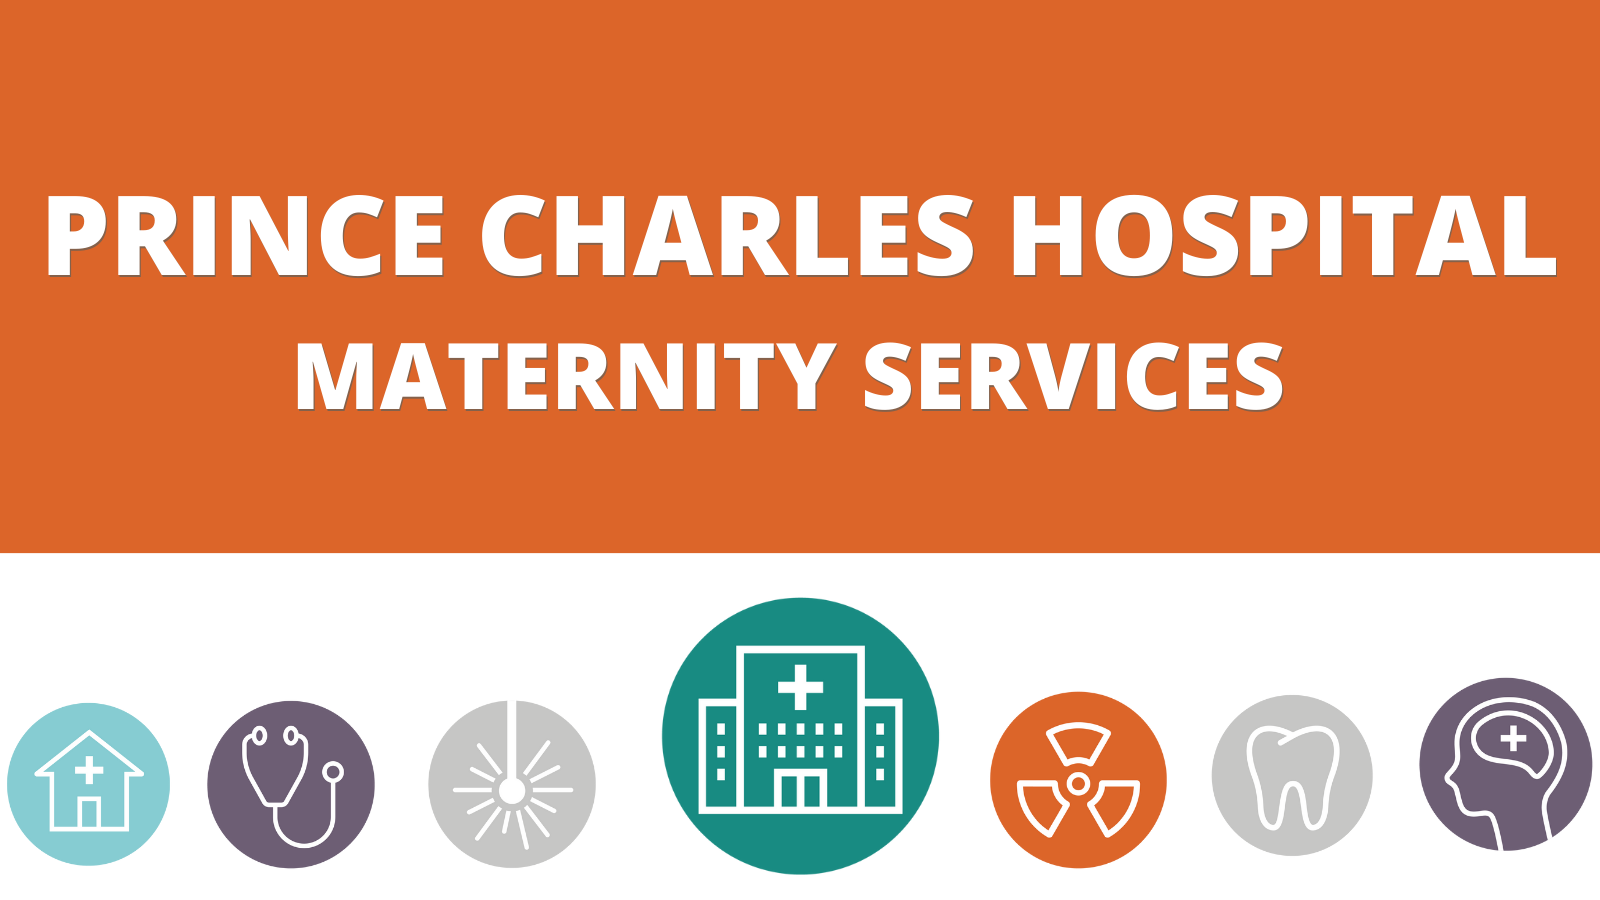 Prince Charles Hospital - Maternity Services 